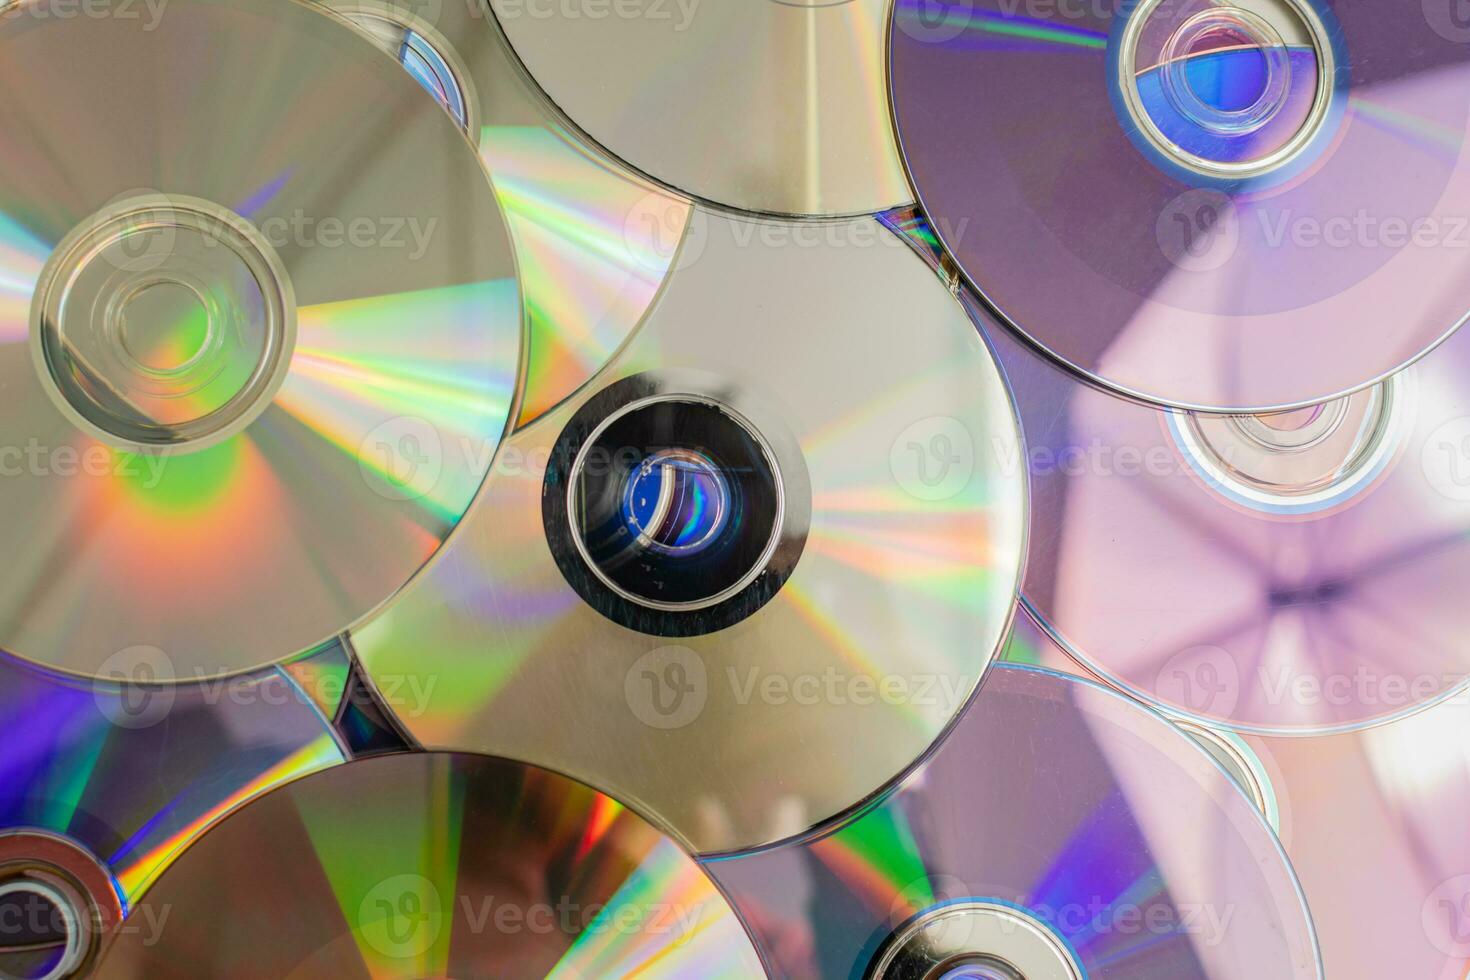 Many old CDs represent technology from the 90s. Stacks of CDs, old songs and old movies. which had been used before and placed on a white table. closeup, selective focus photo